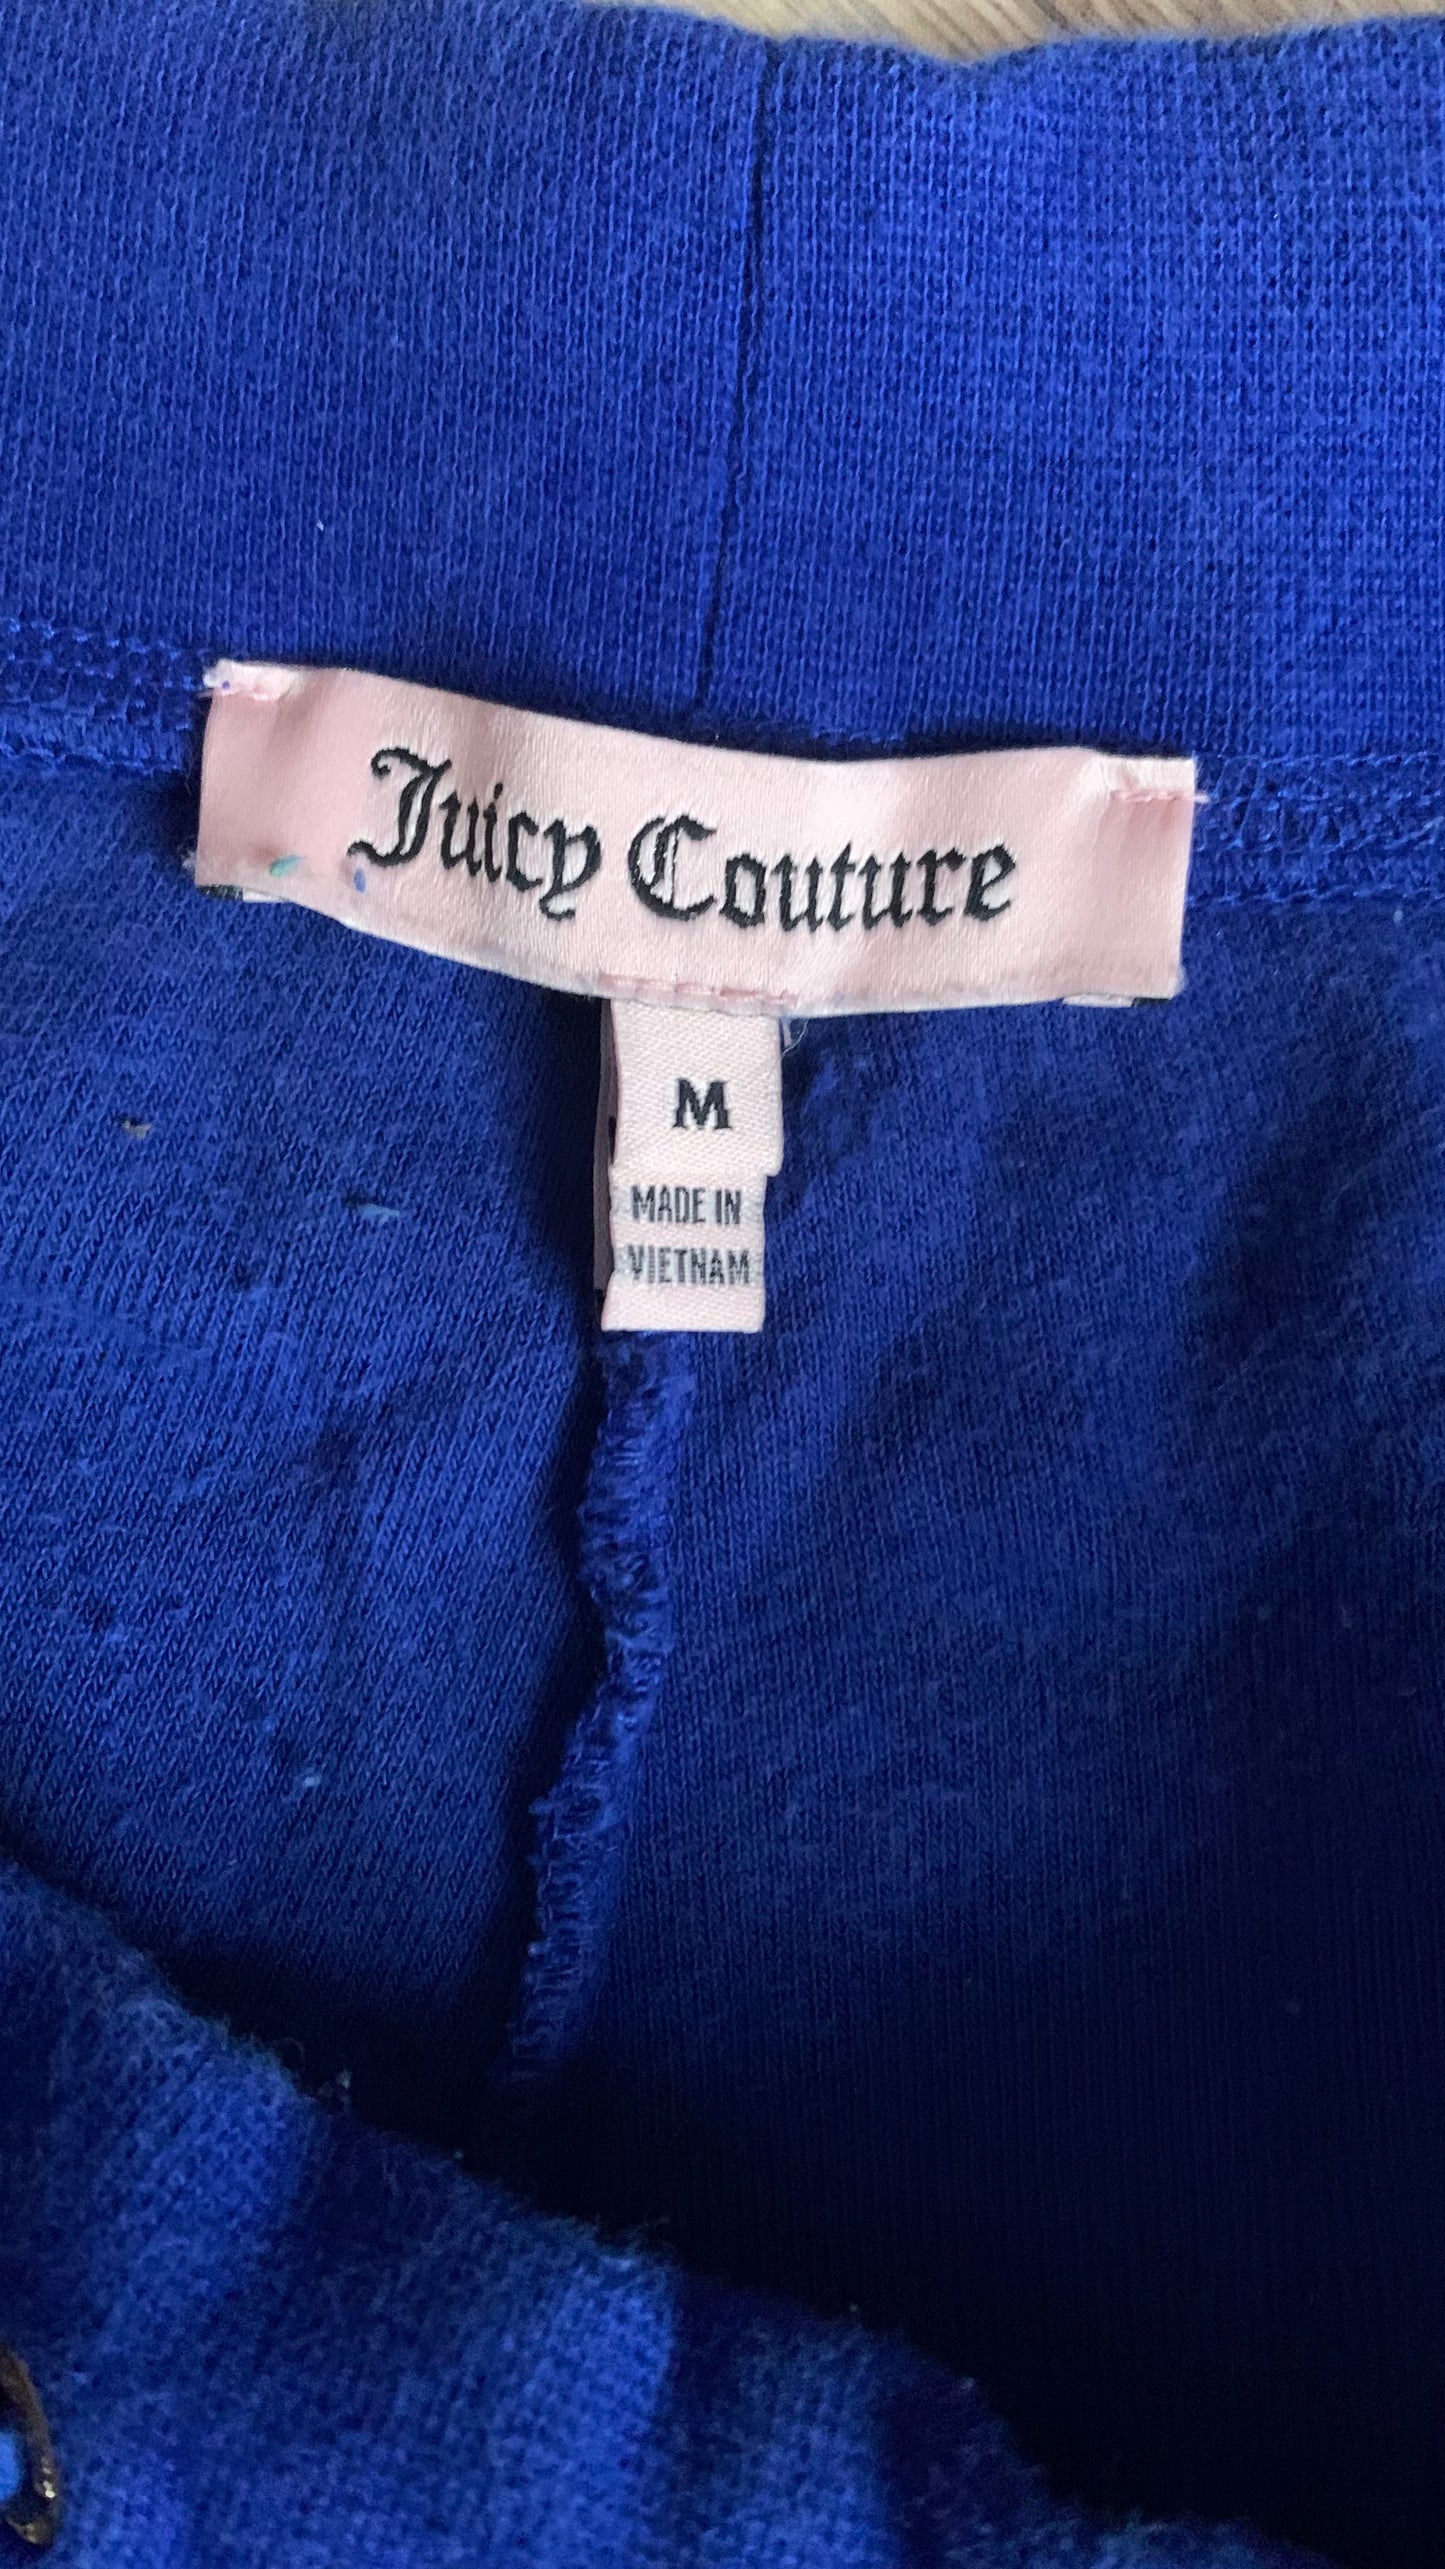 Blue Terry Cloth Juicy Couture Tracksuit